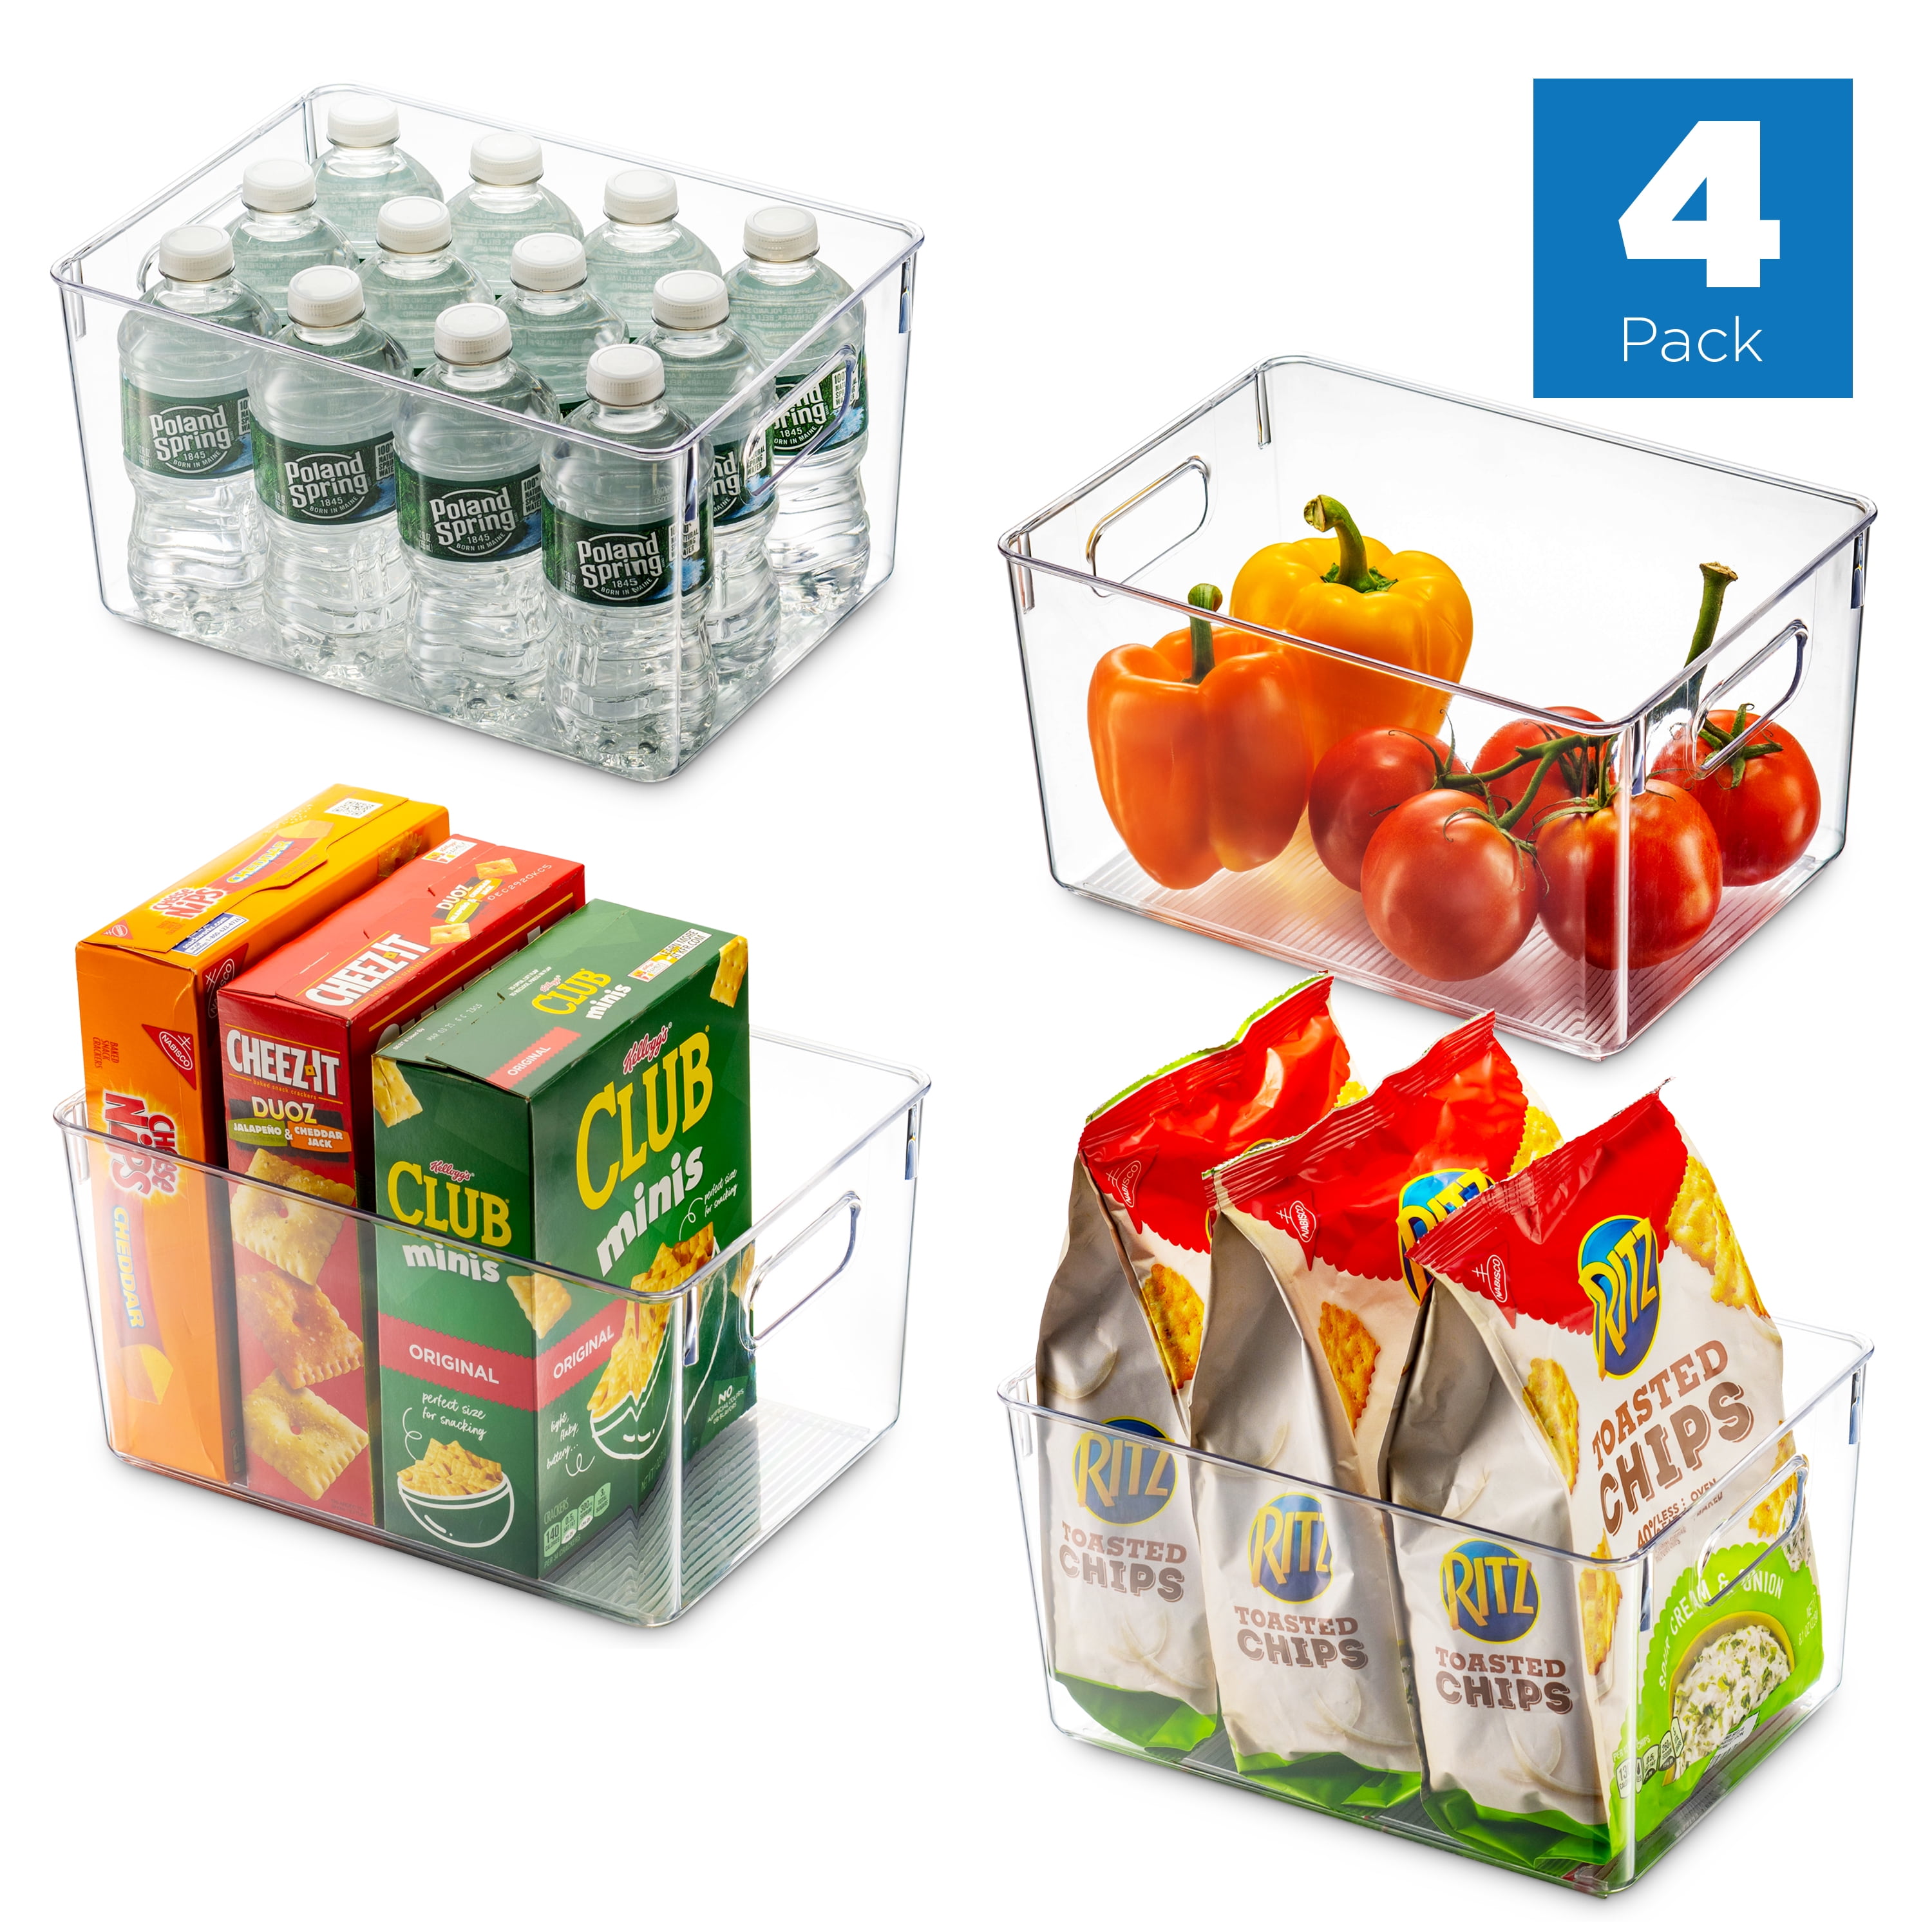 4 Pack Clear Plastic Storage Bins with Handles, Vtopmart Pantry Organizer  Bins, for Refrigerator, Freezer, Cabinet, Kitchen, Countertops, Large 